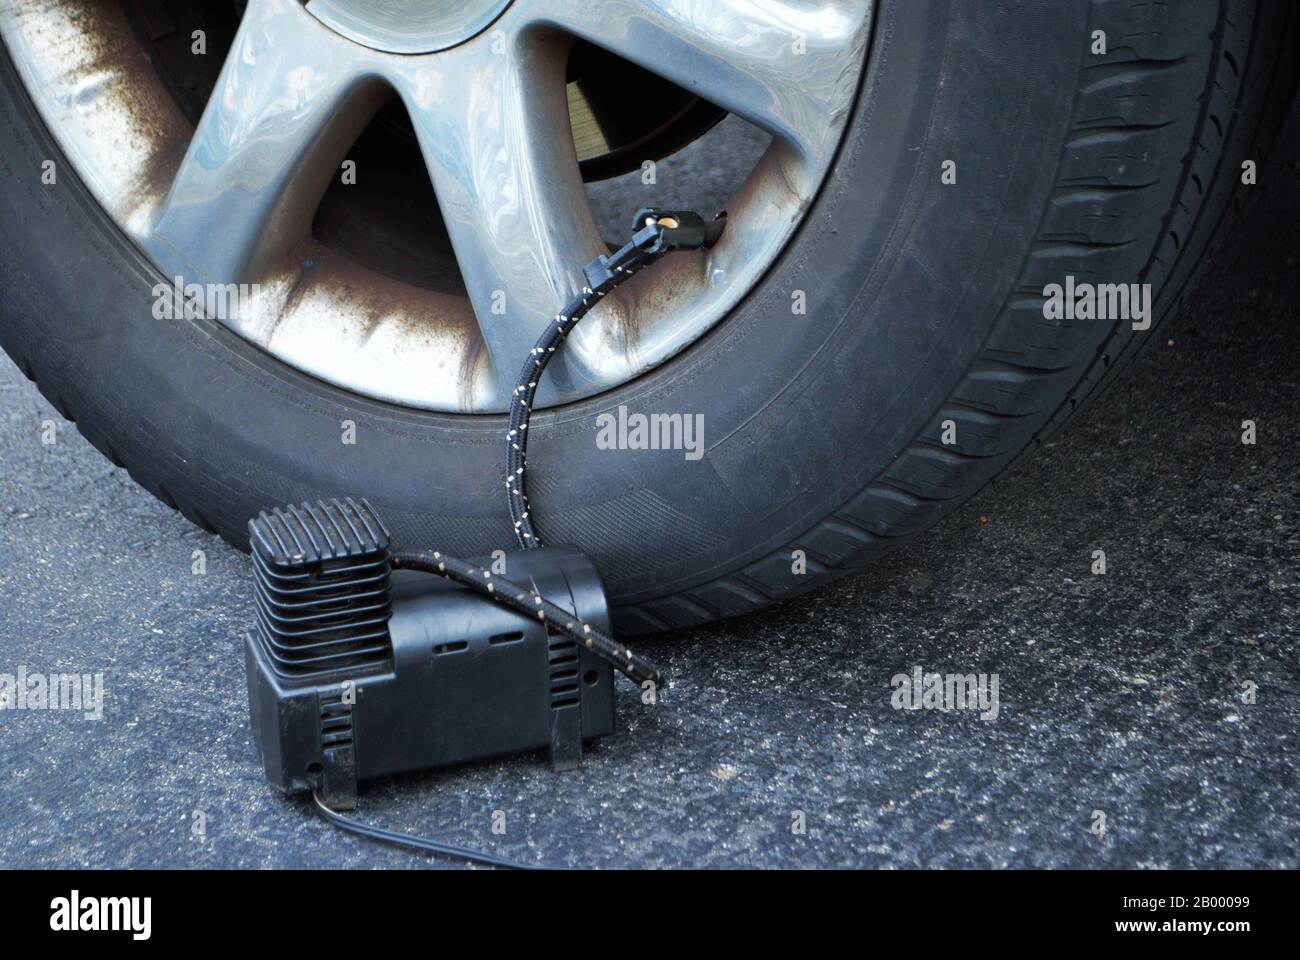 close up of a portable air compressor connected to the valve stem of a car tire Stock Photo